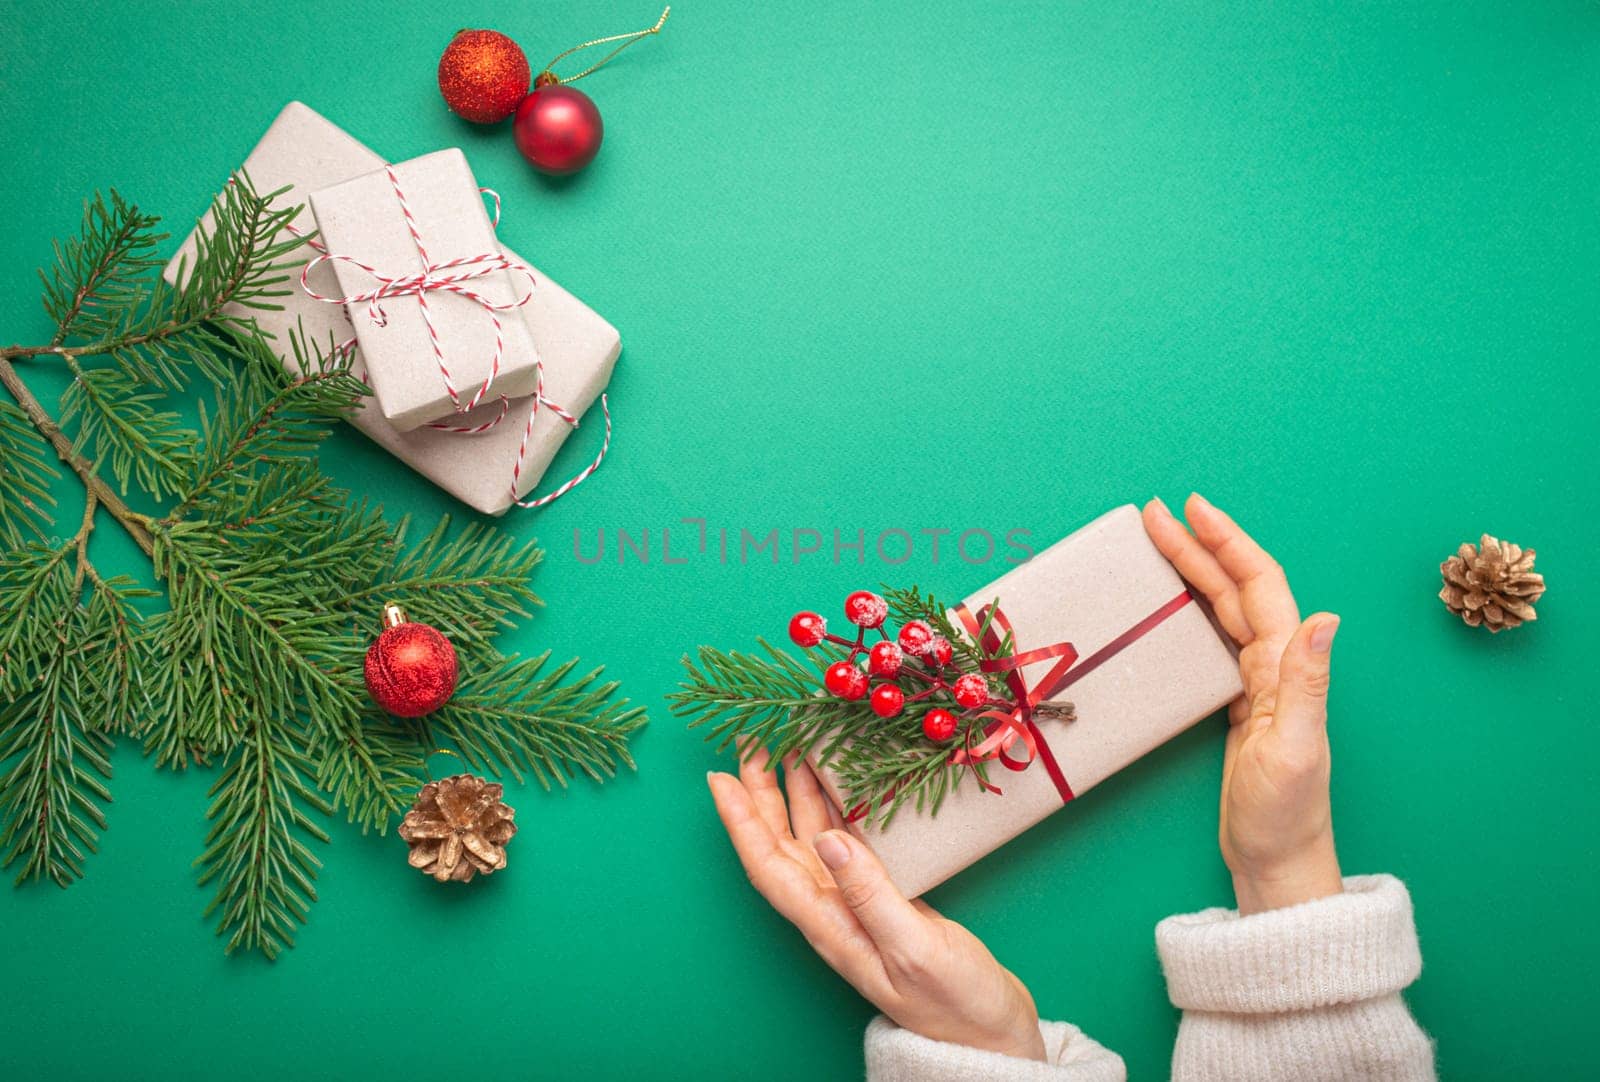 Christmas or New Year celebration green paper festive background with female hands holding wrapped gift box, decoration fir tree, cones, berries, sparkly red balls. Giving presents concept. by its_al_dente